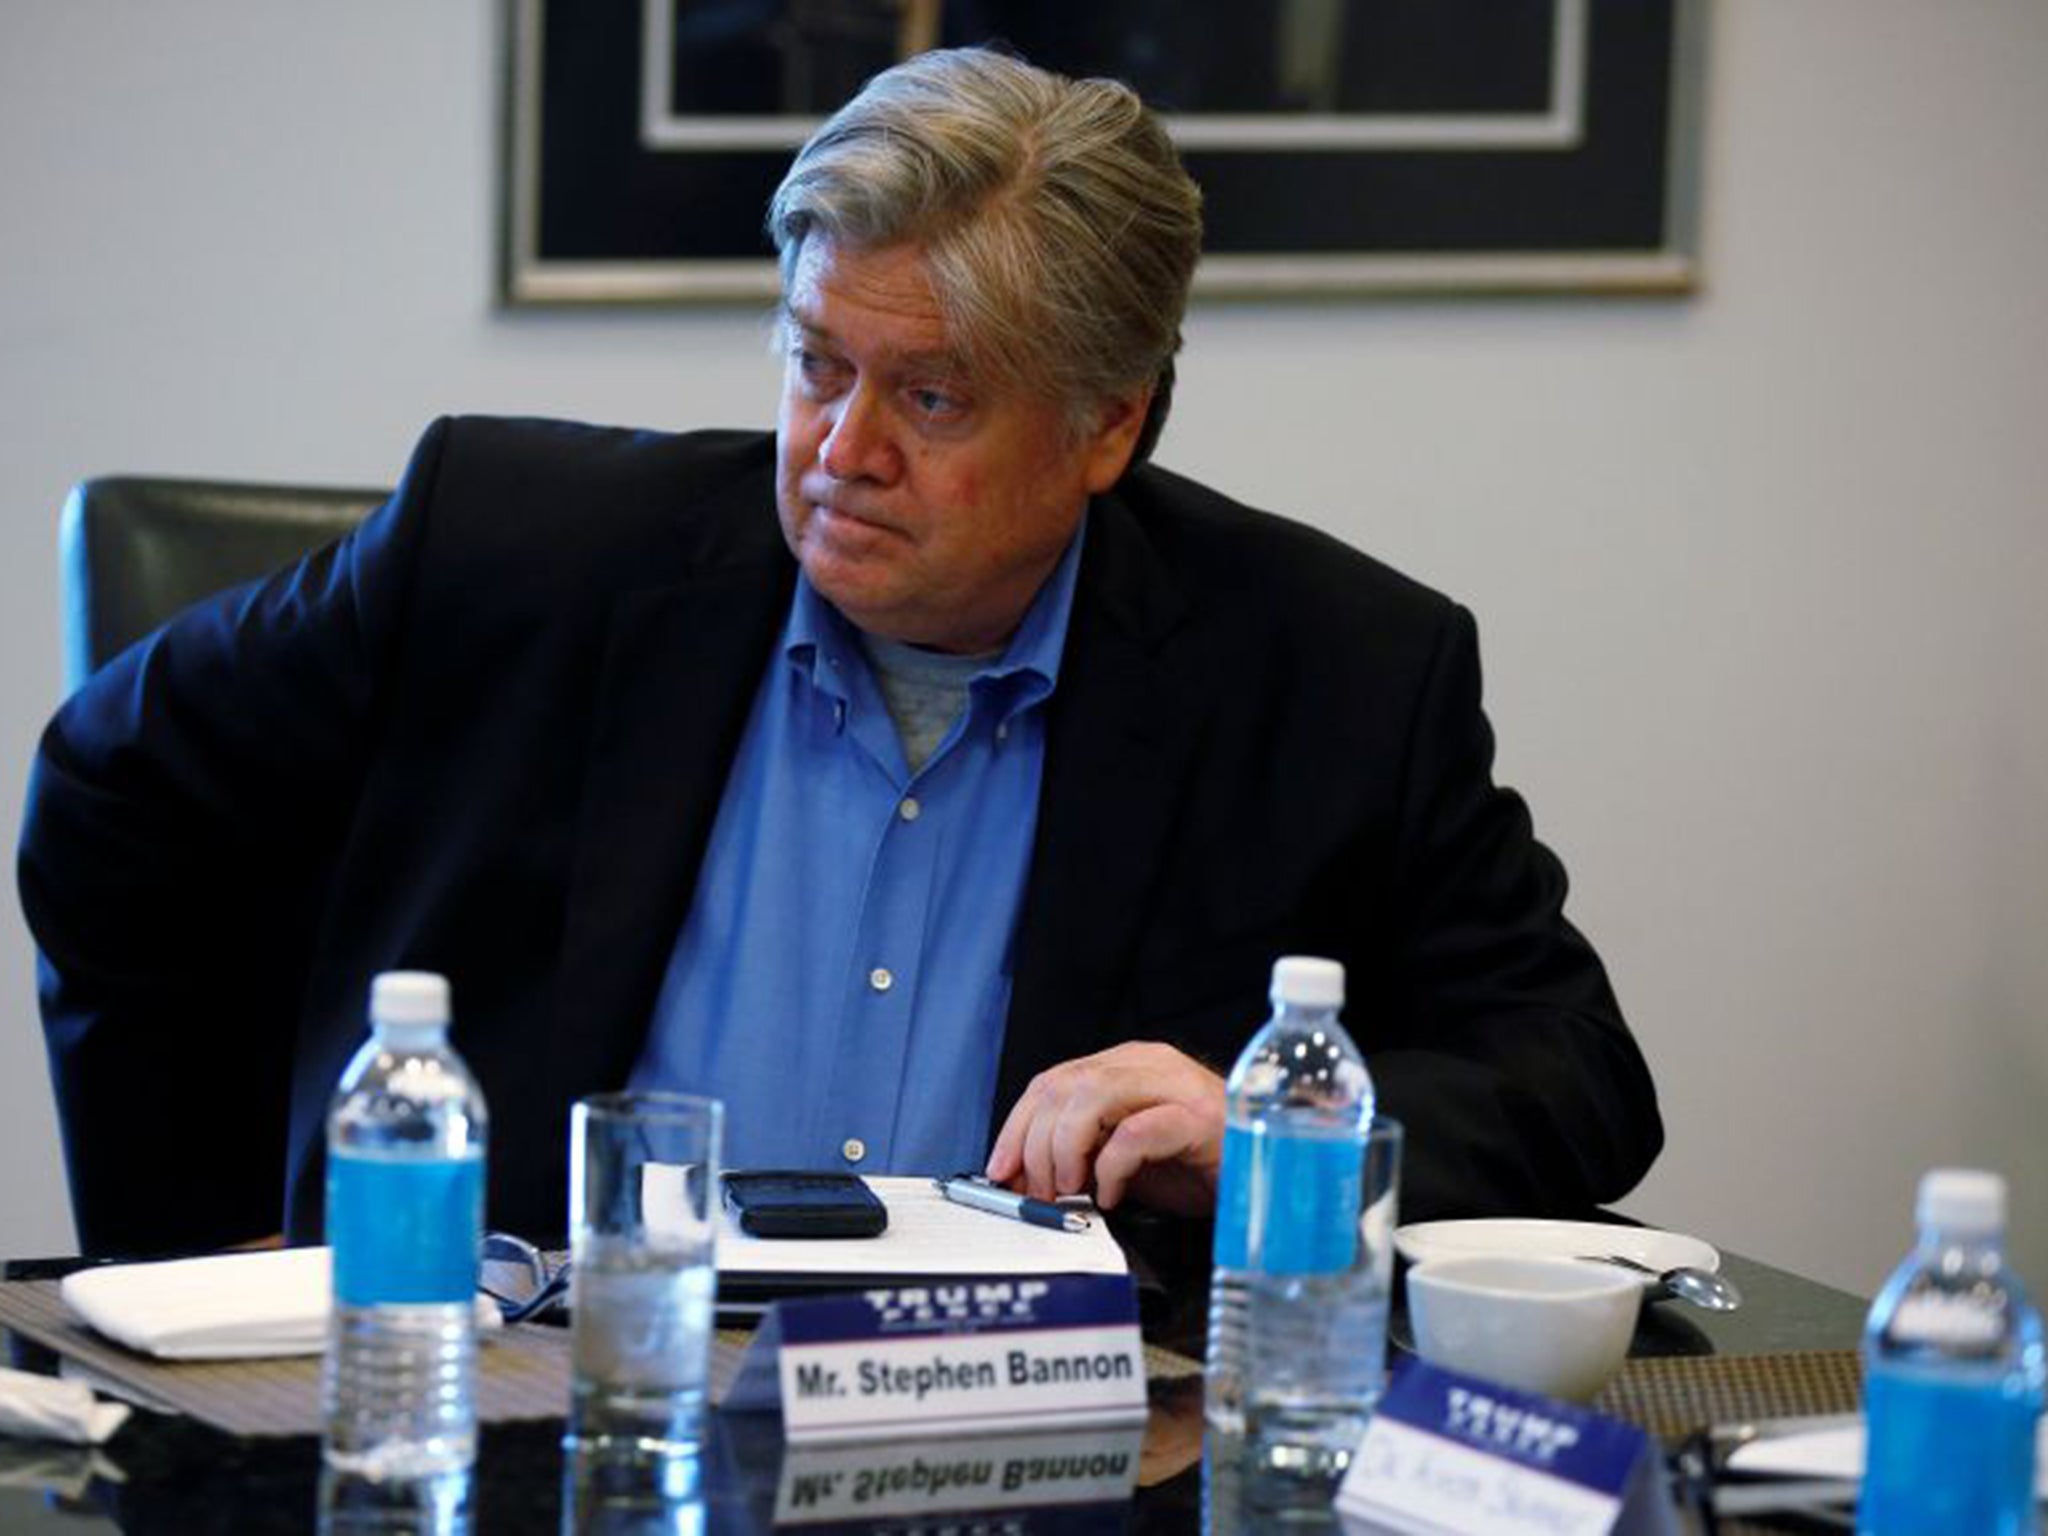 Former Breitbart chairman Steve Bannon was a key player in Trump’s campaign for the White House